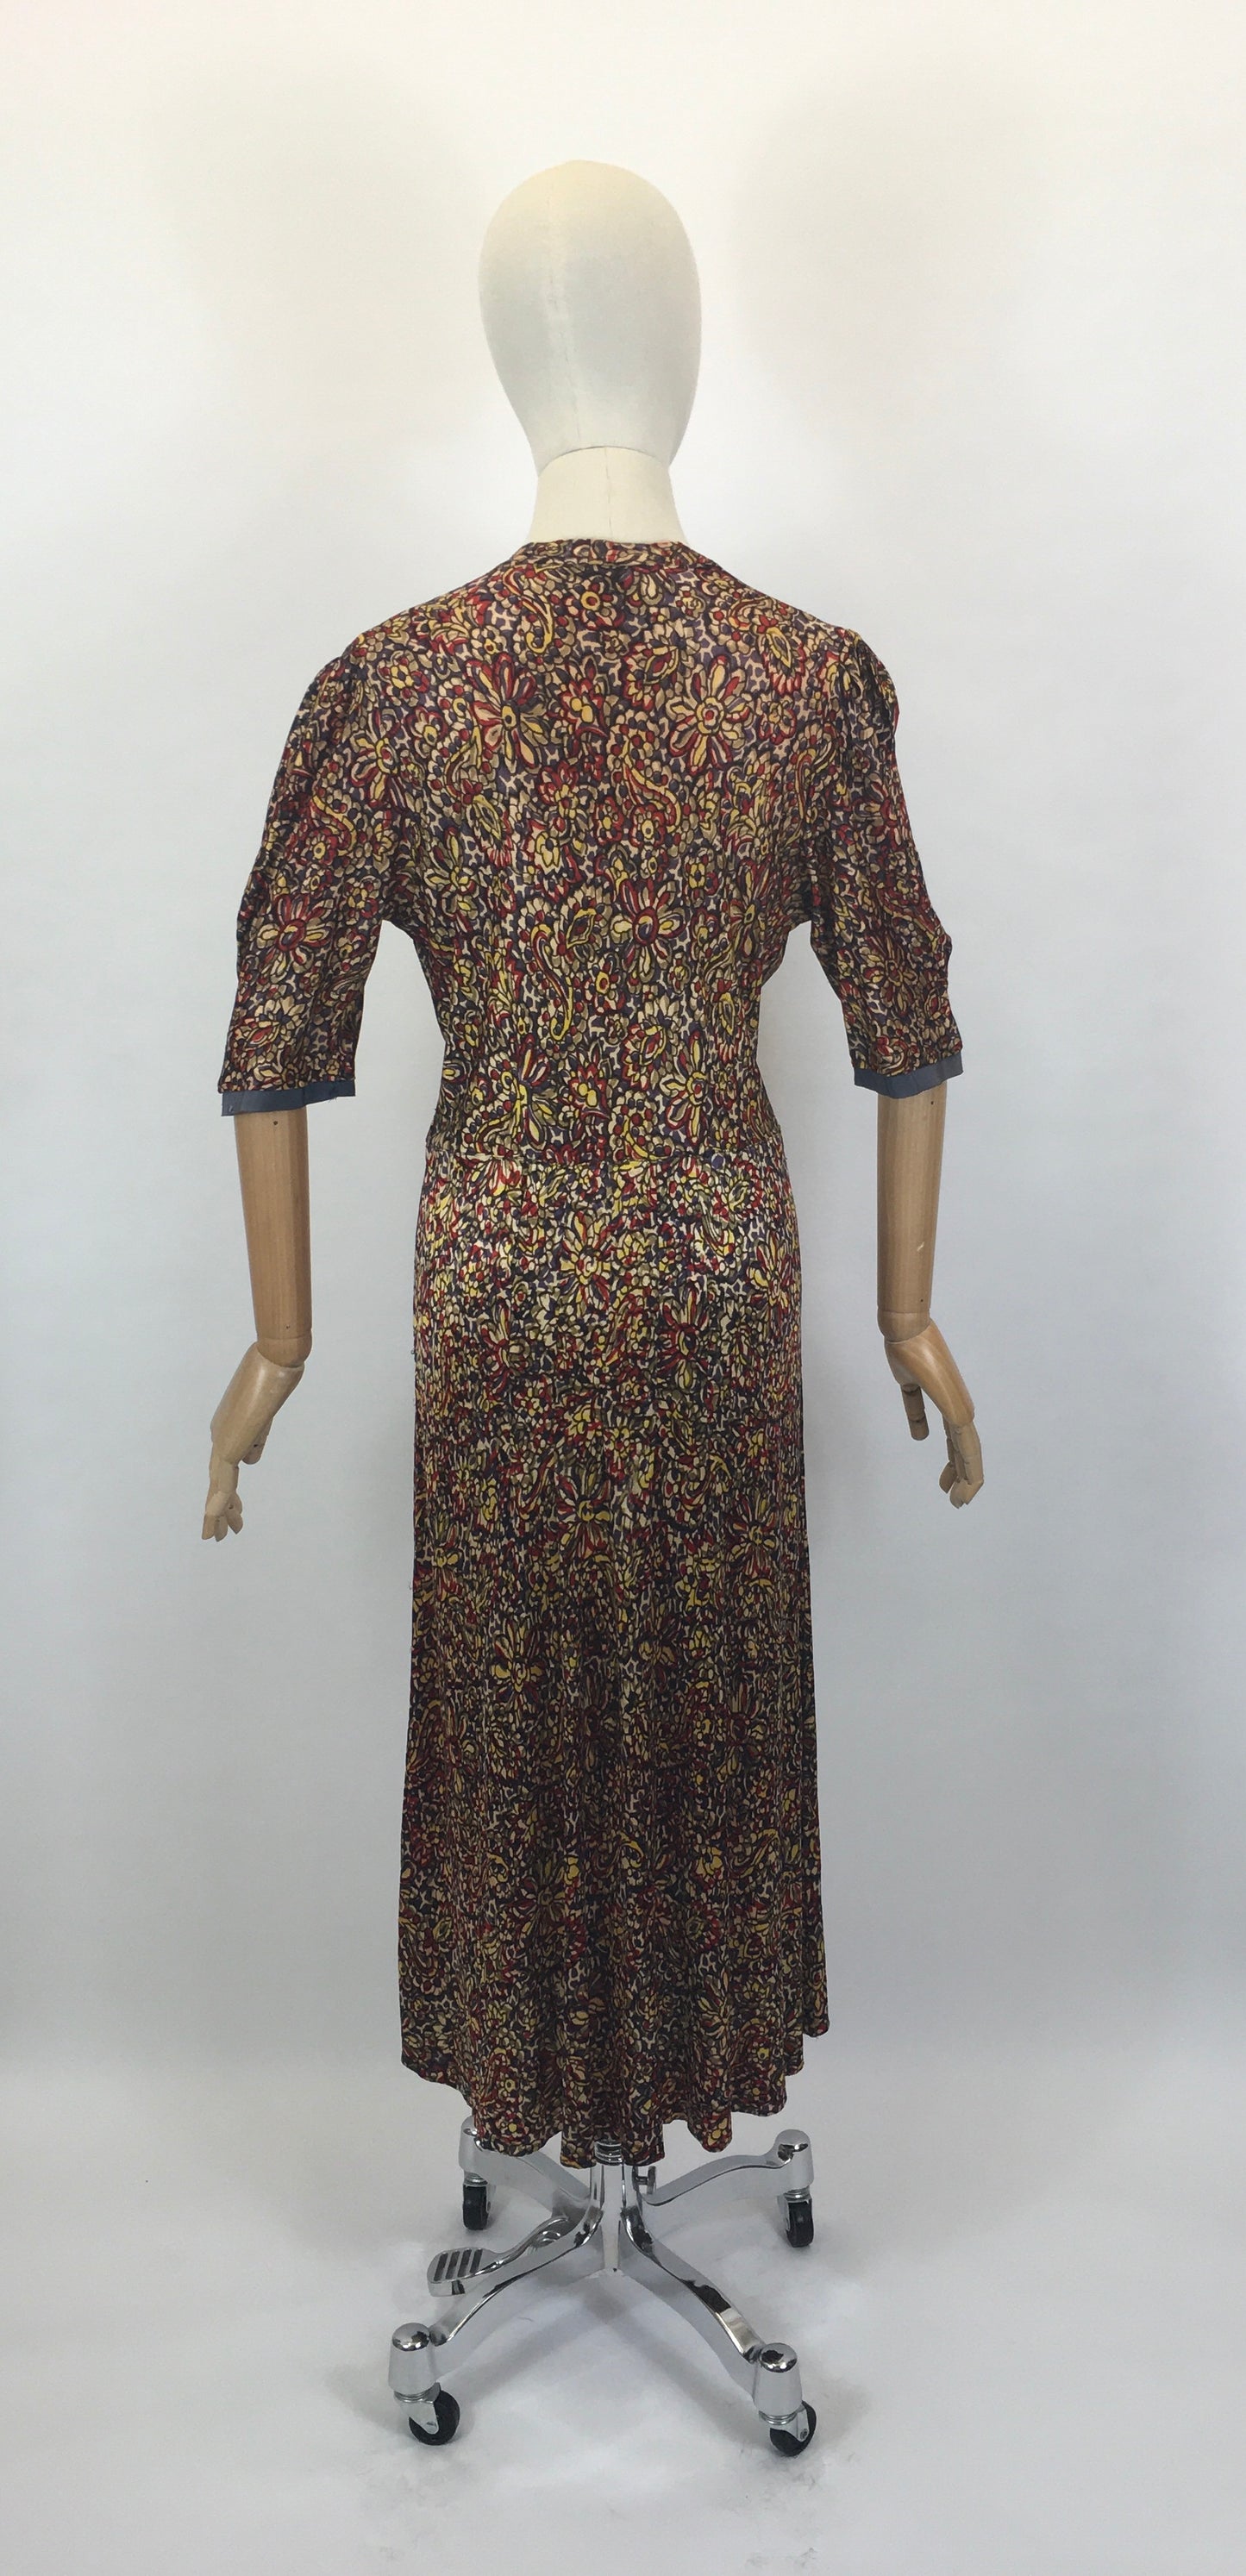 Original 1940’s STUNNING Rayon Jersey Dress AS IS - In Reds, Purples, Yellows & Navy